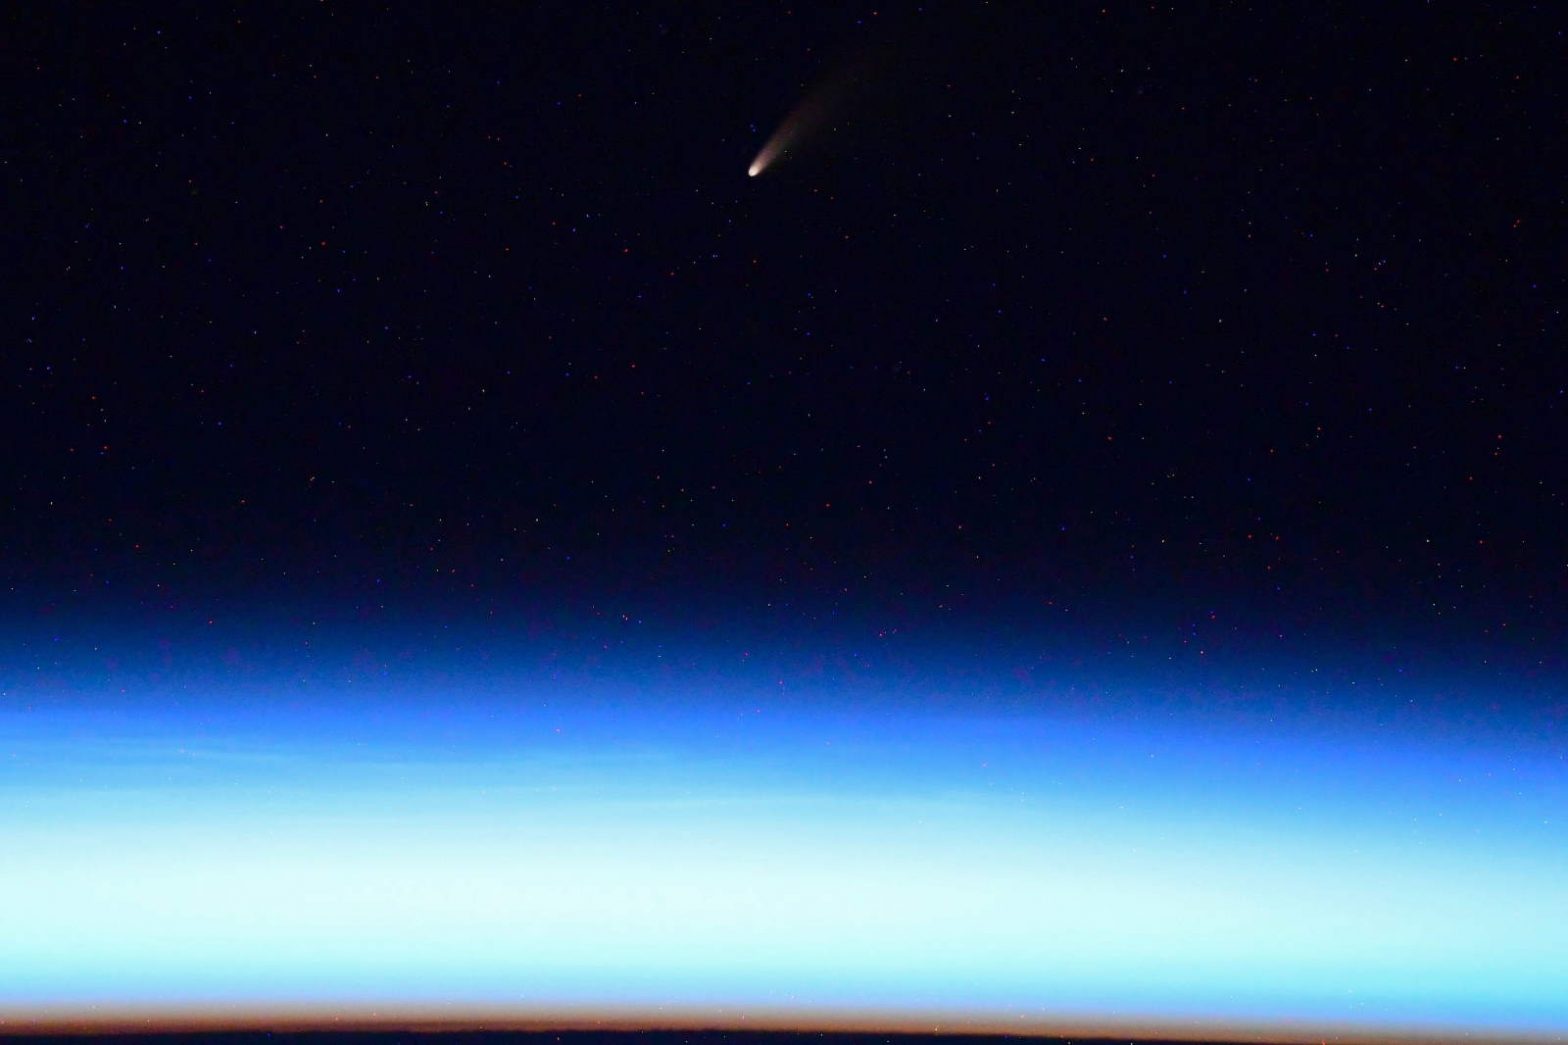 A spectacular comet photo by the Russian cosmonaut Ivan Vagner